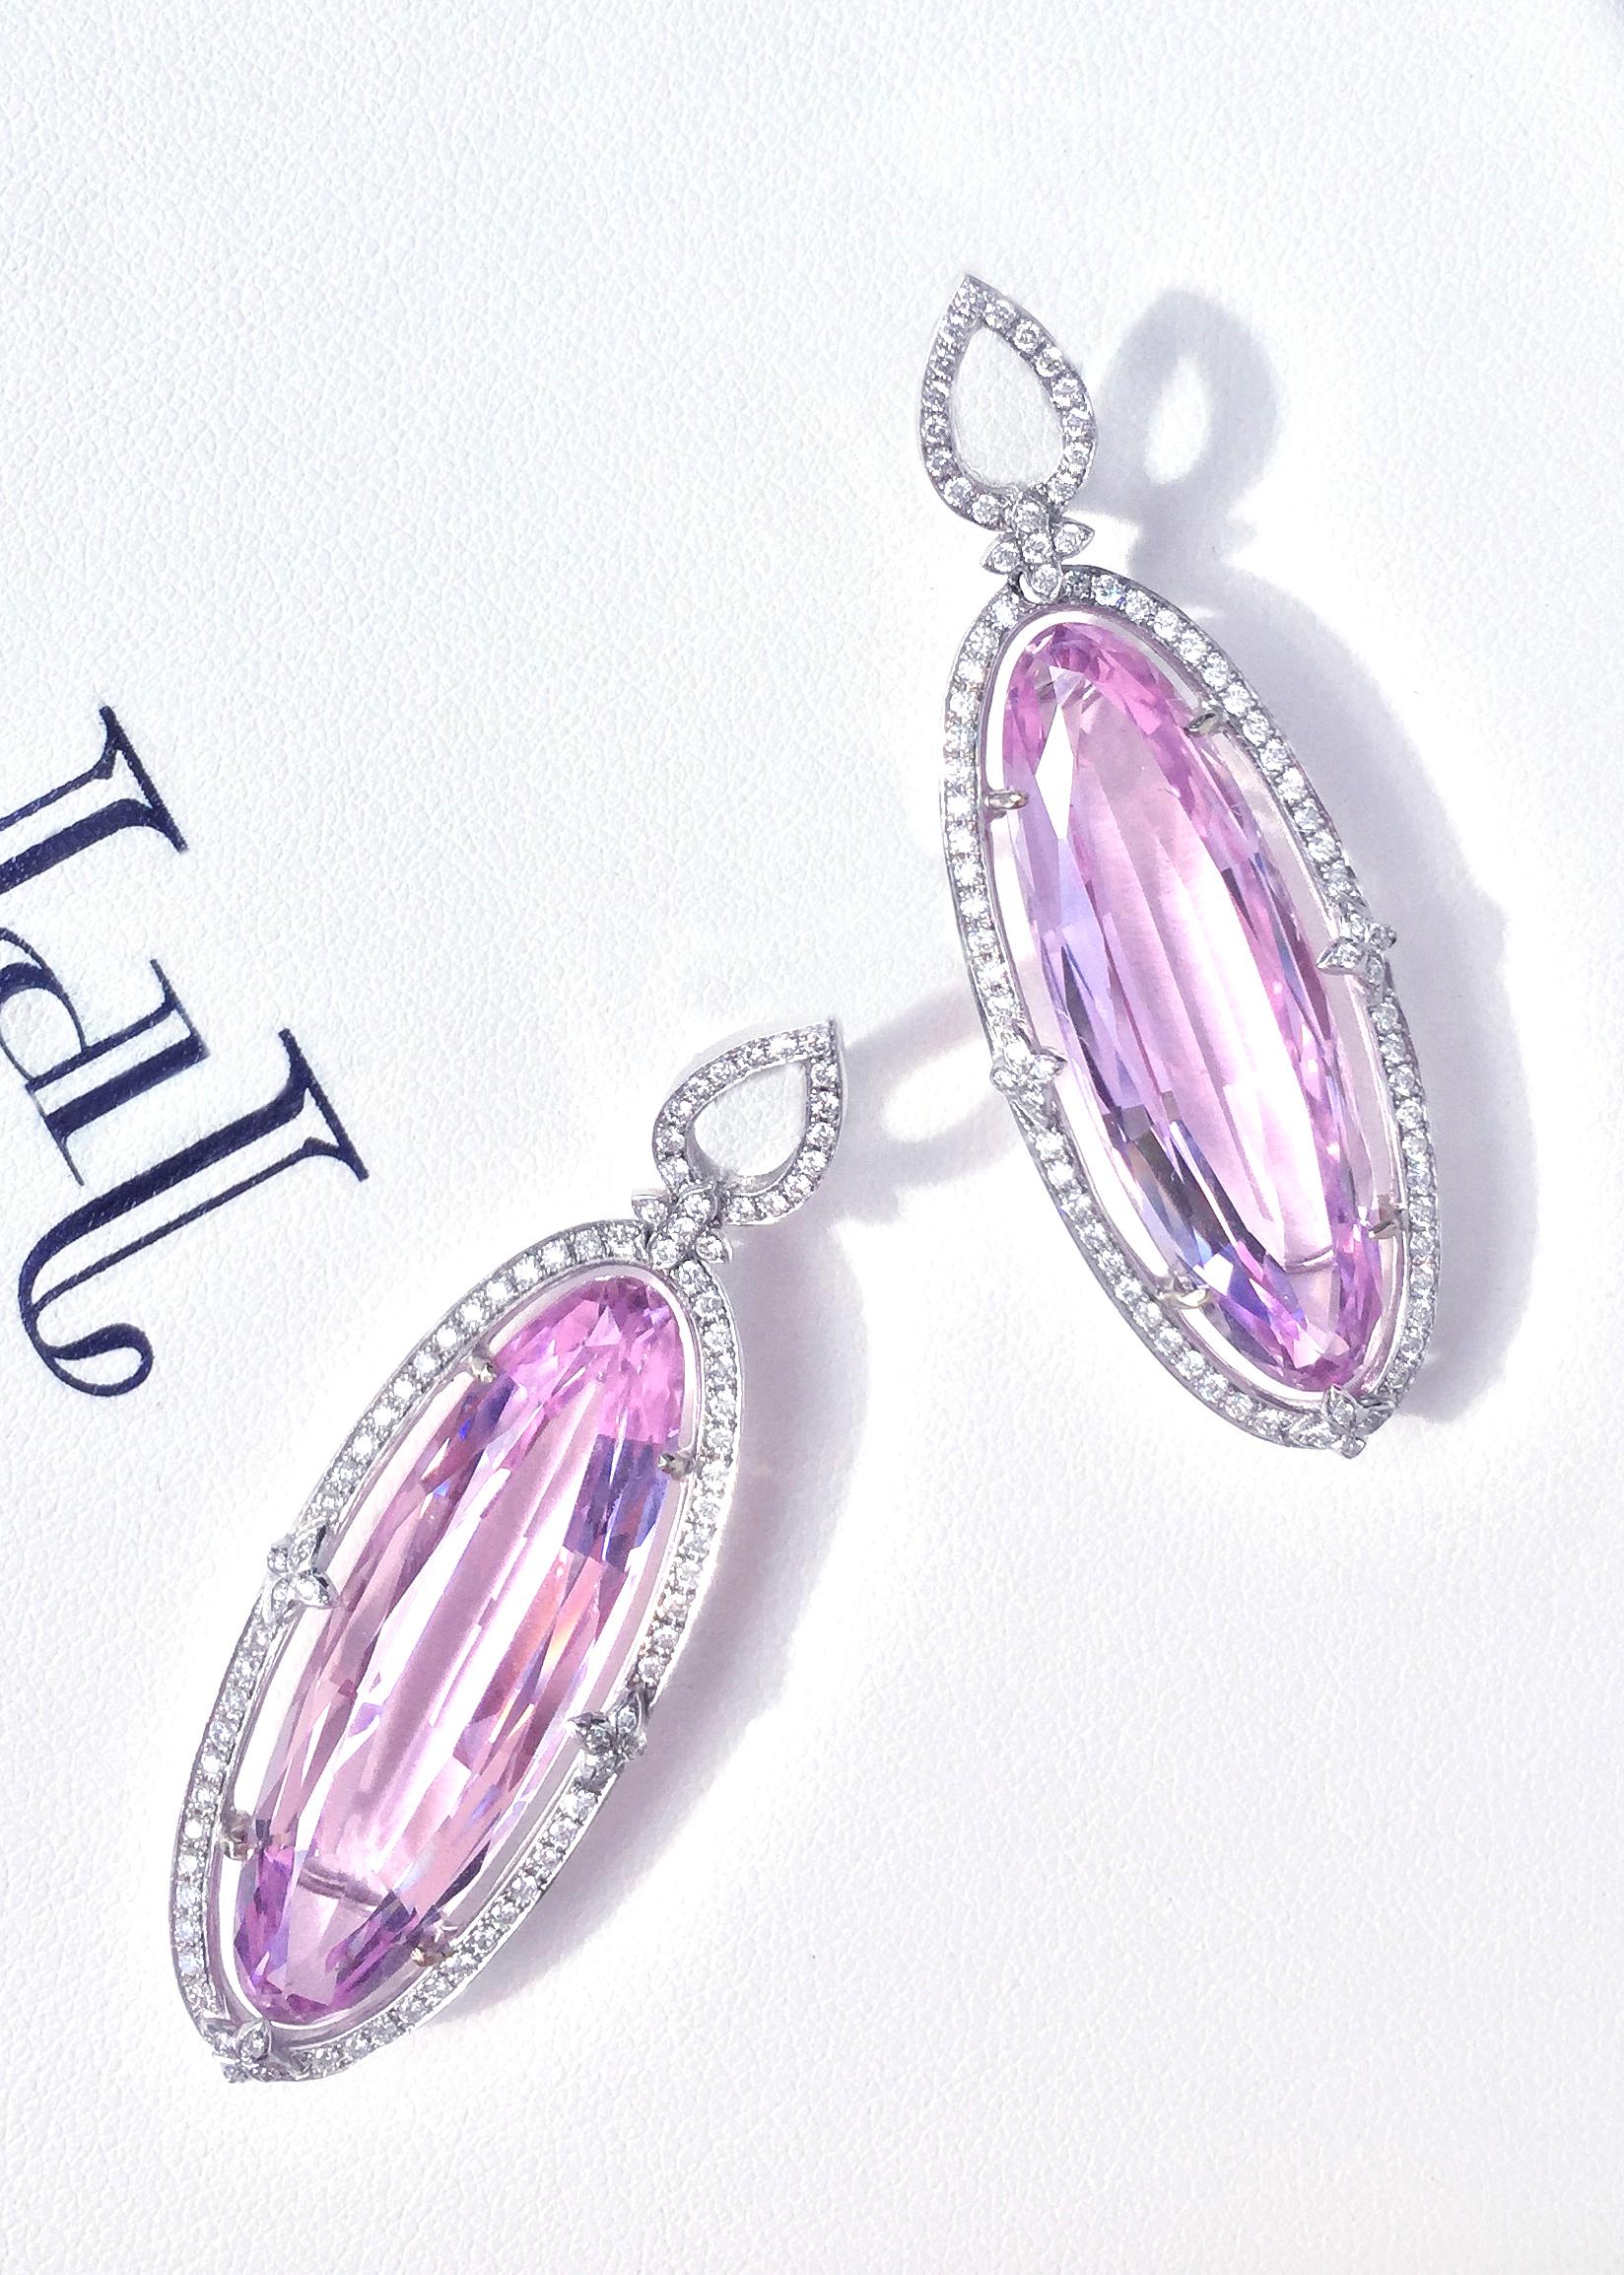 Oval shapped pink kunzites weighing 38.60ctw framed with brilliant cut diamonds and pear motif totalling 1.22ctw , VS/G+ set in 18k white gold with an omega style backing.